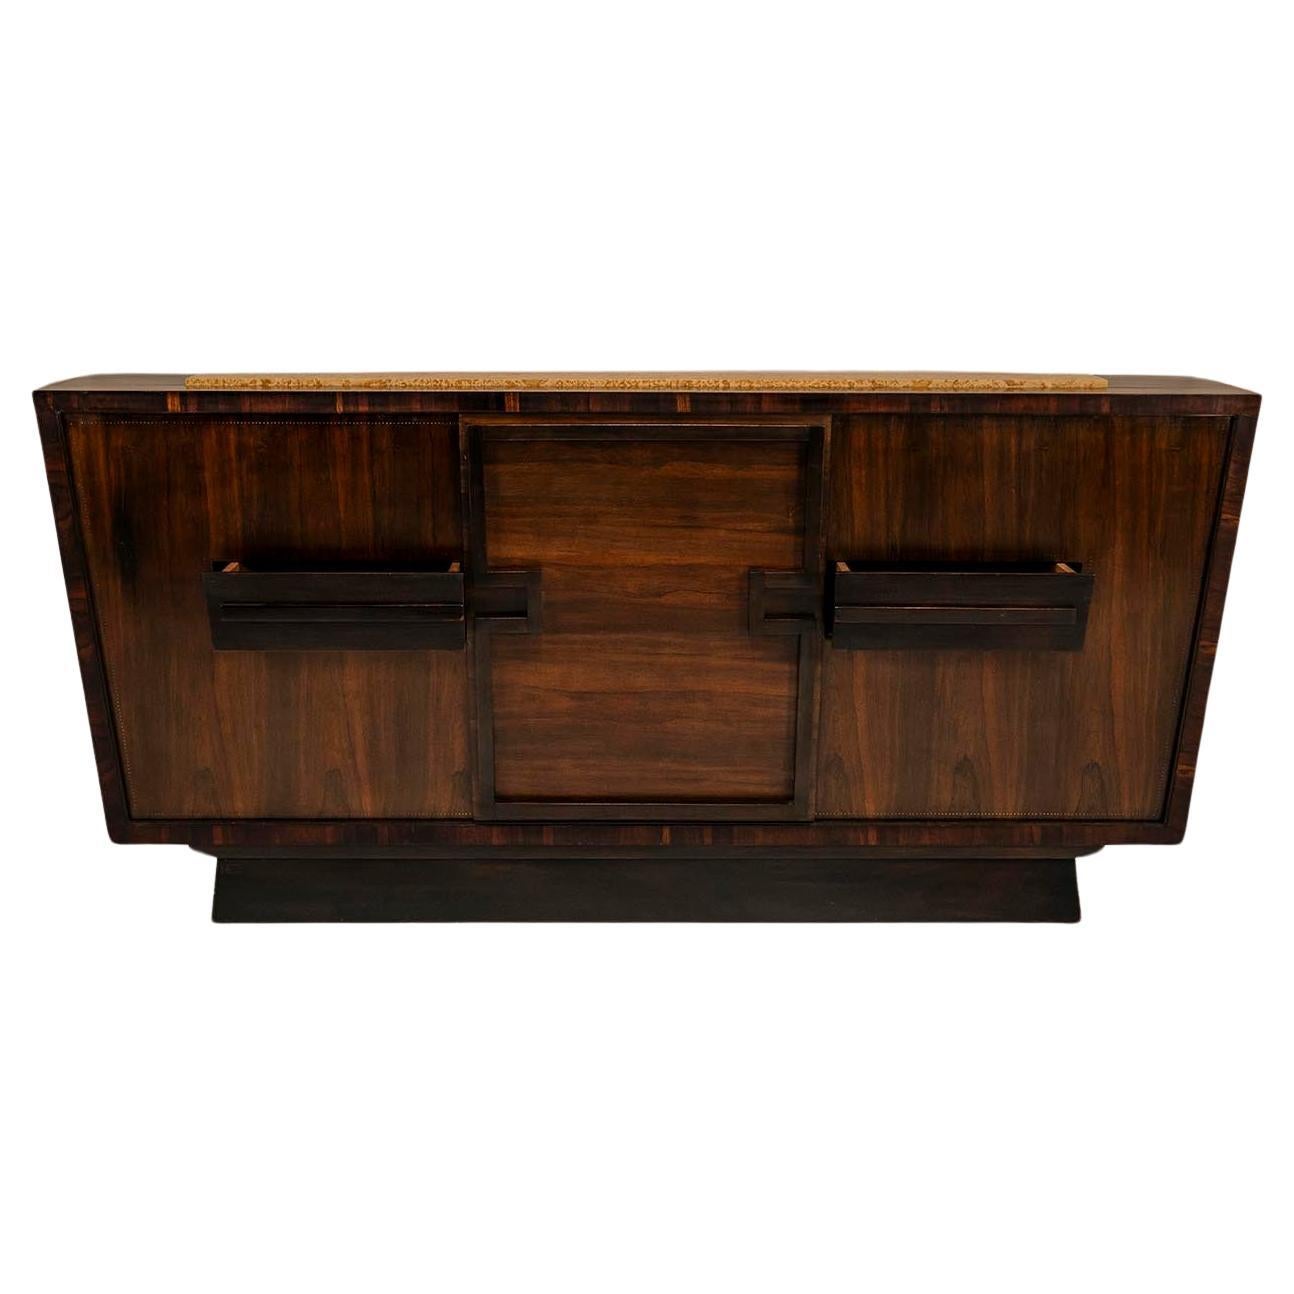 Modernist Sideboard In Studded Rosewood By Andre Sornay, France 1940s For Sale